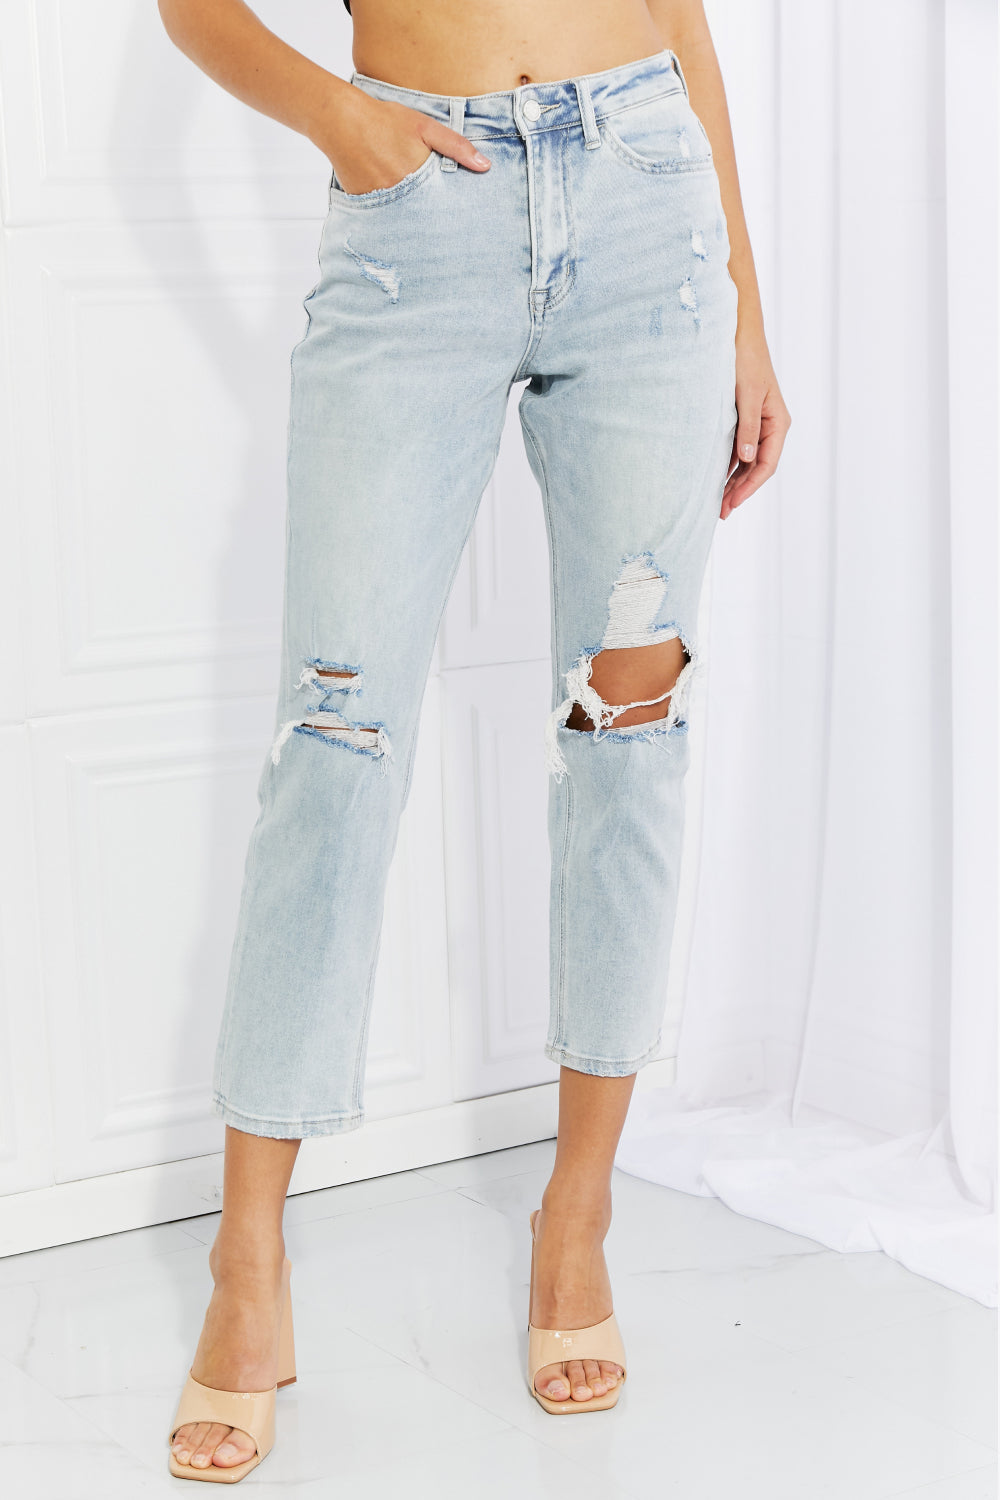 Vervet by Flying Monkey Stand Out Full Size Distressed Cropped Jeans - DromedarShop.com Online Boutique